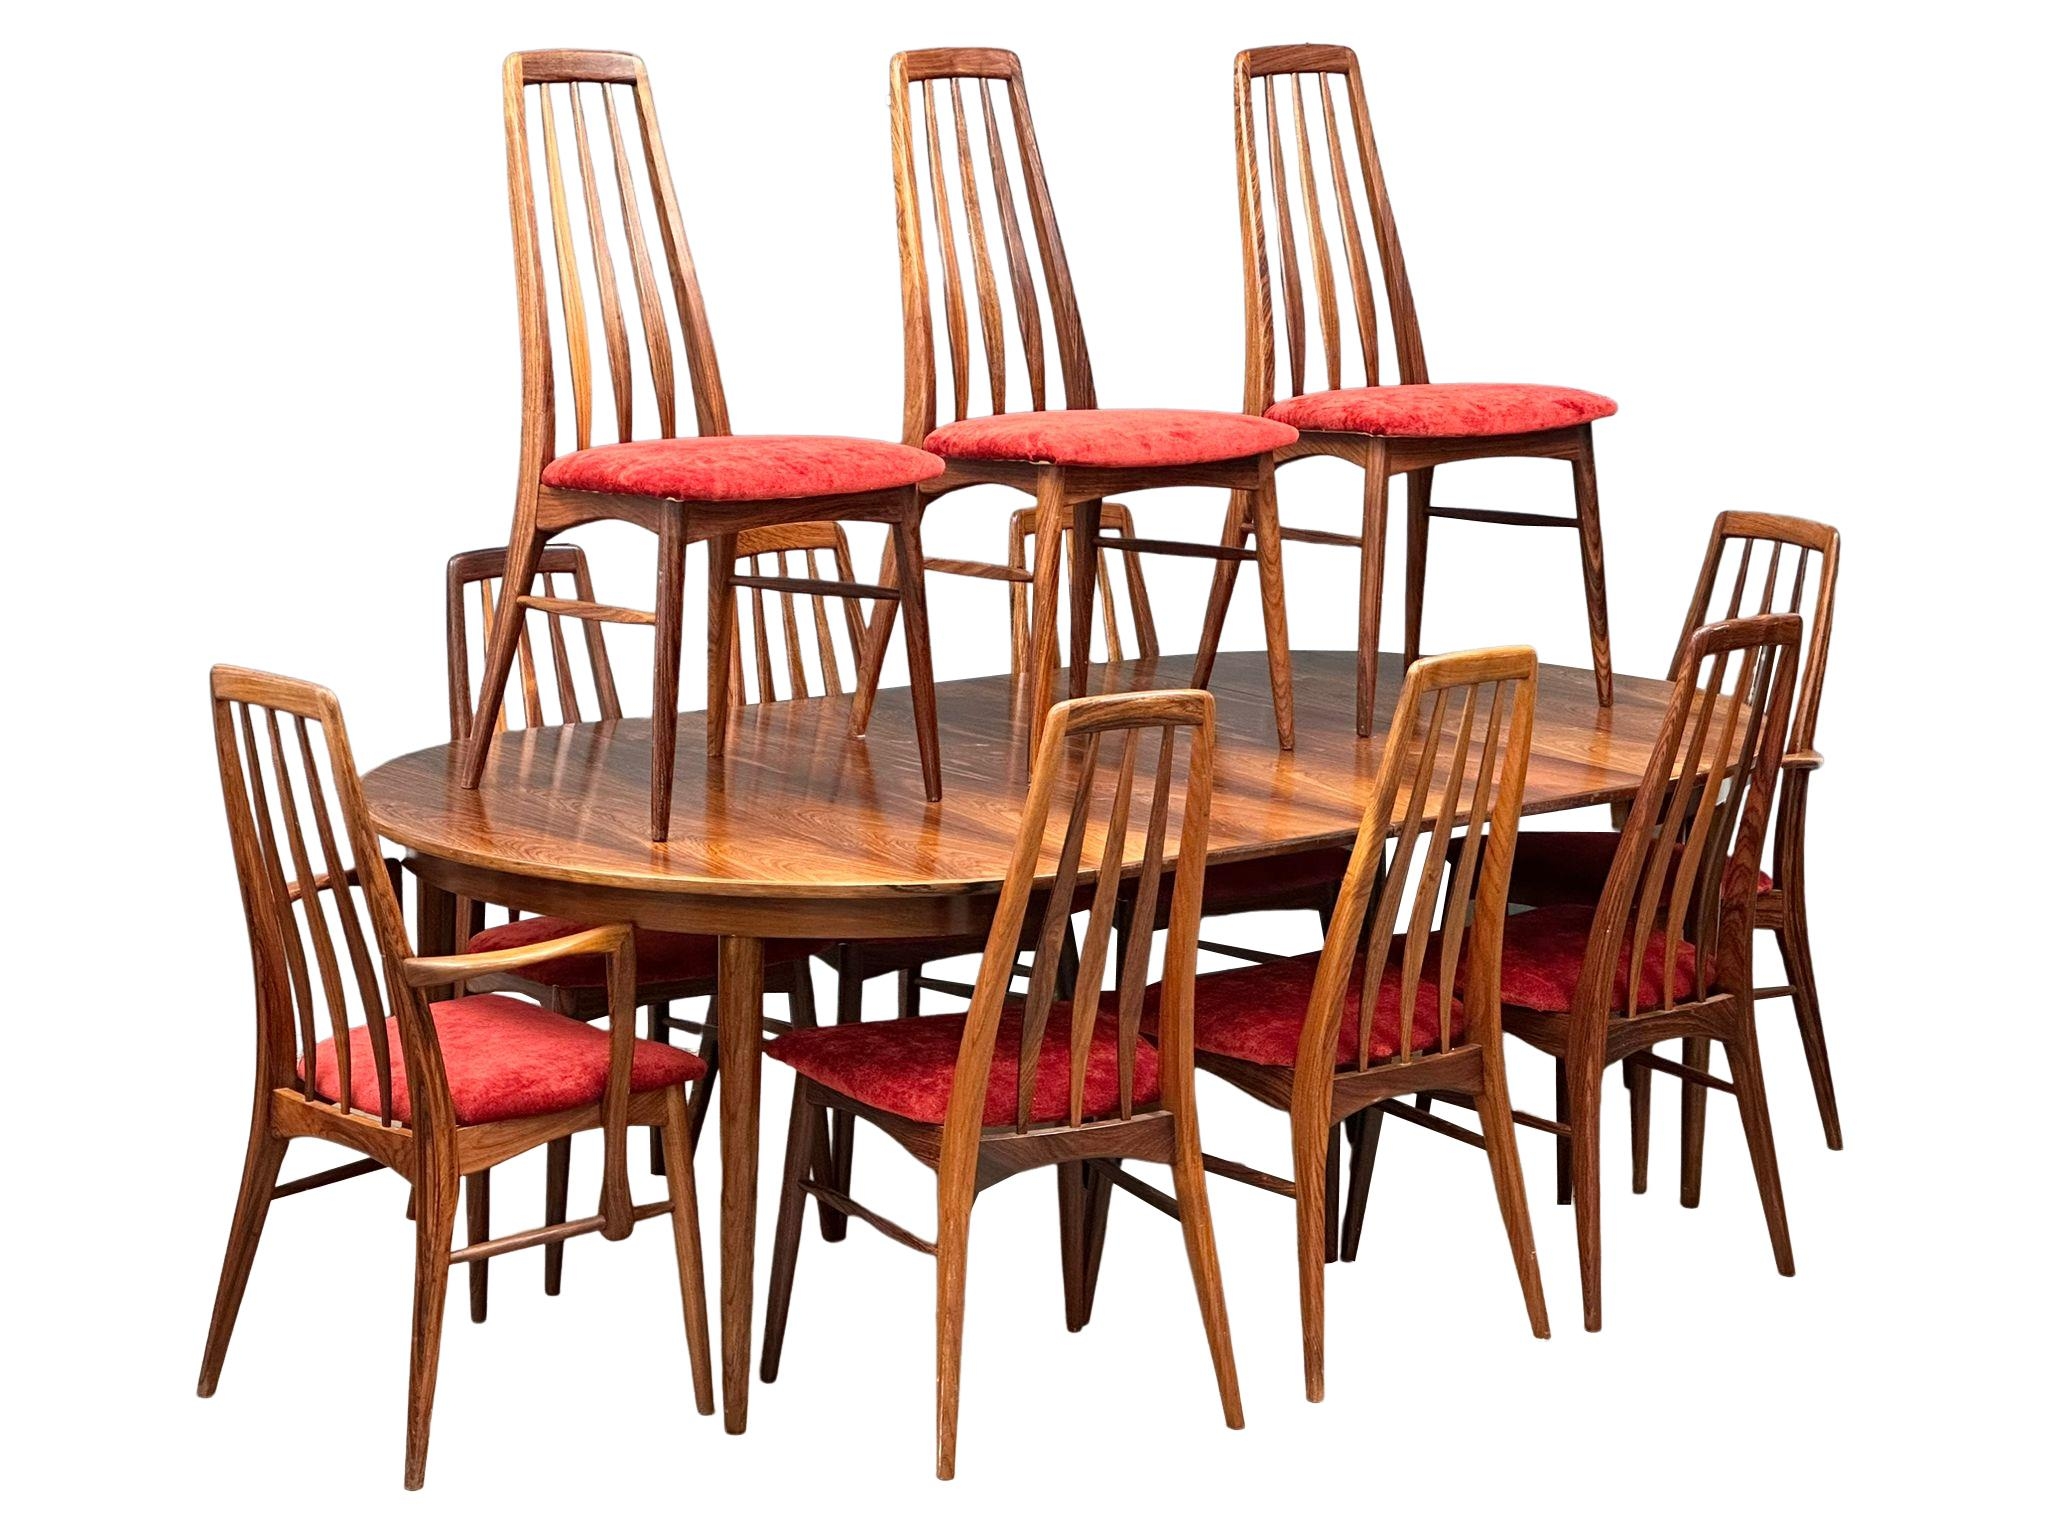 An exceptional quality rare set of 11 Danish Mid Century rosewood ‘Eva’ chairs, Niels Koefoed